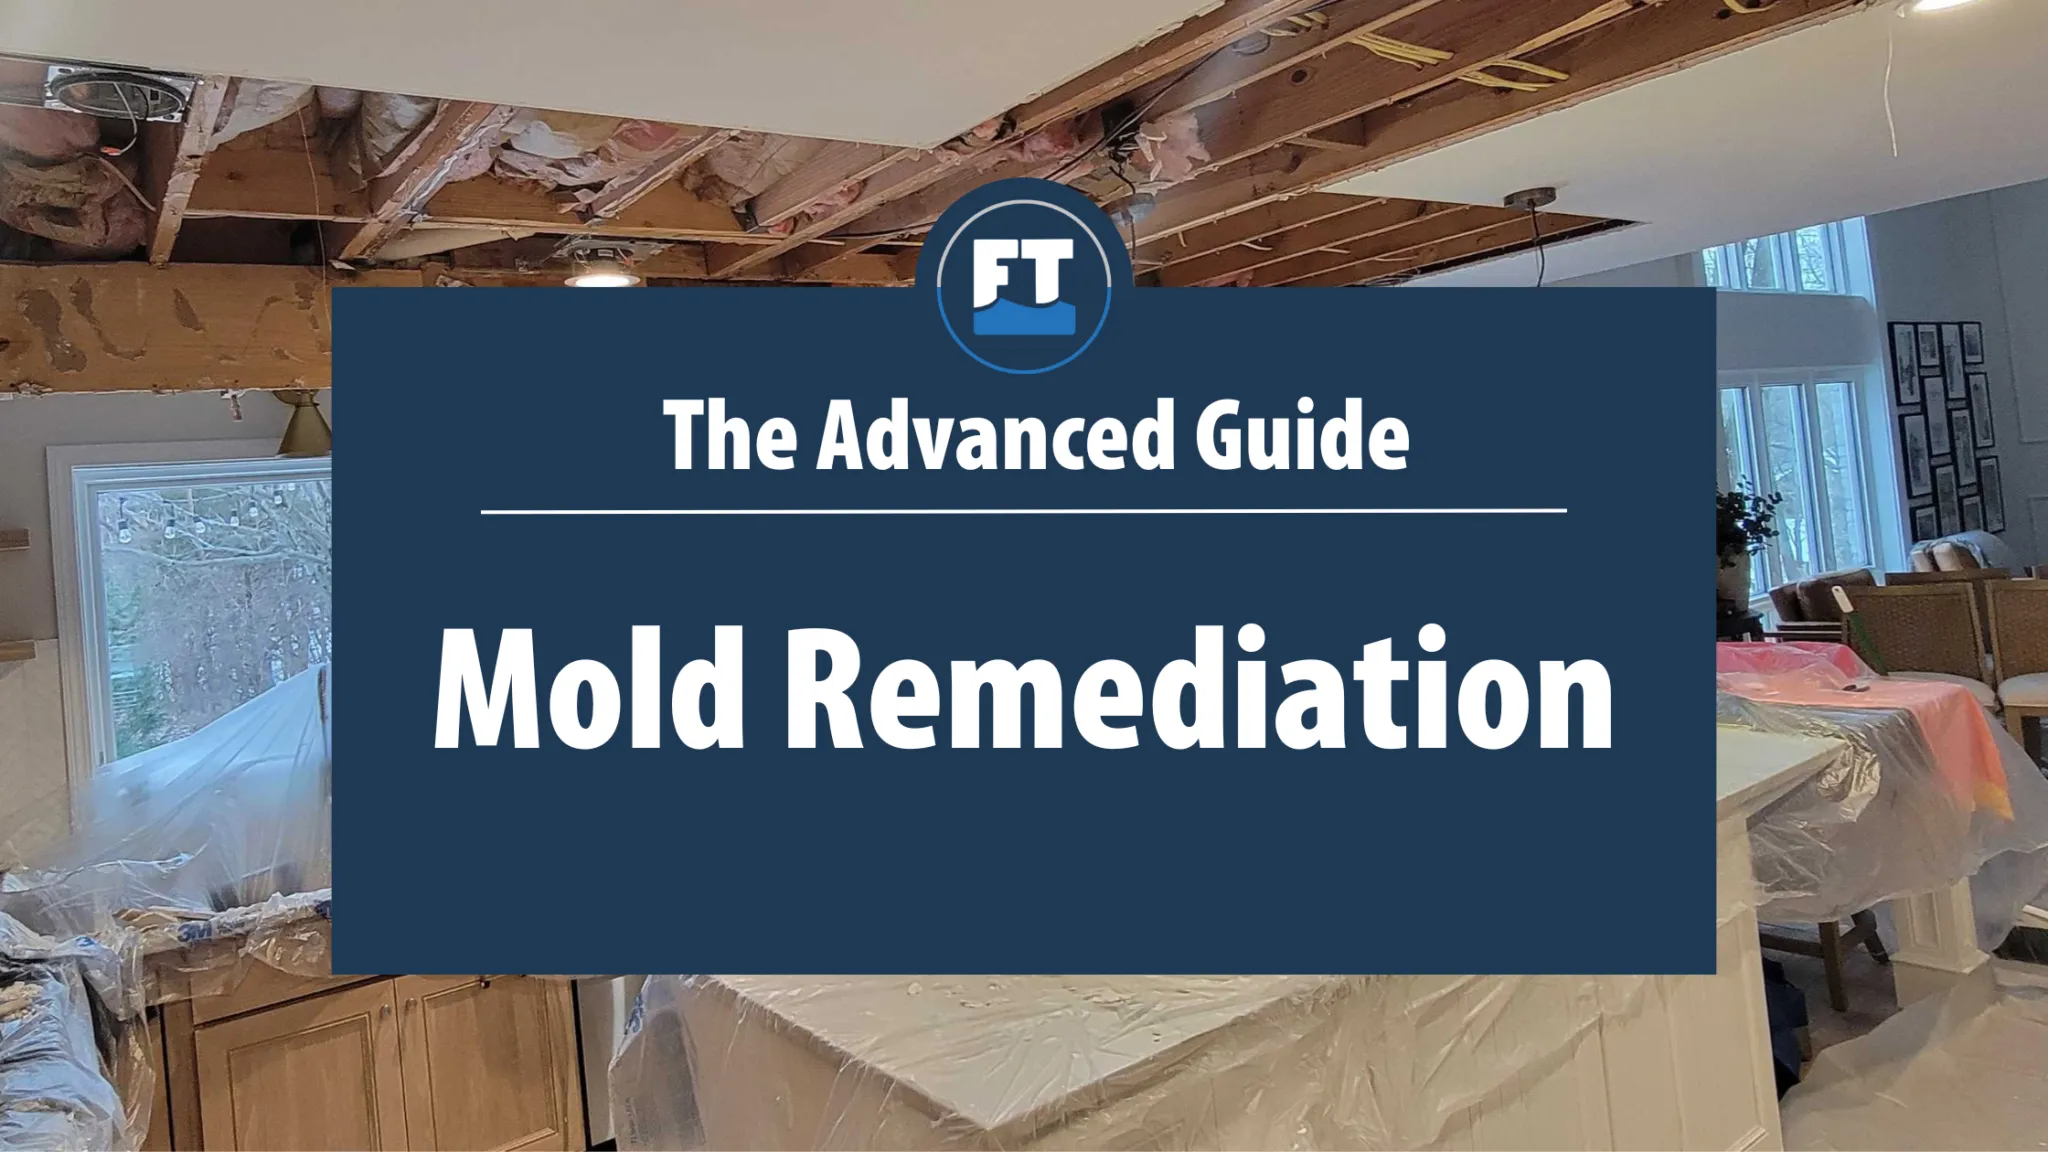 The Advanced Guide to Mold Remediation